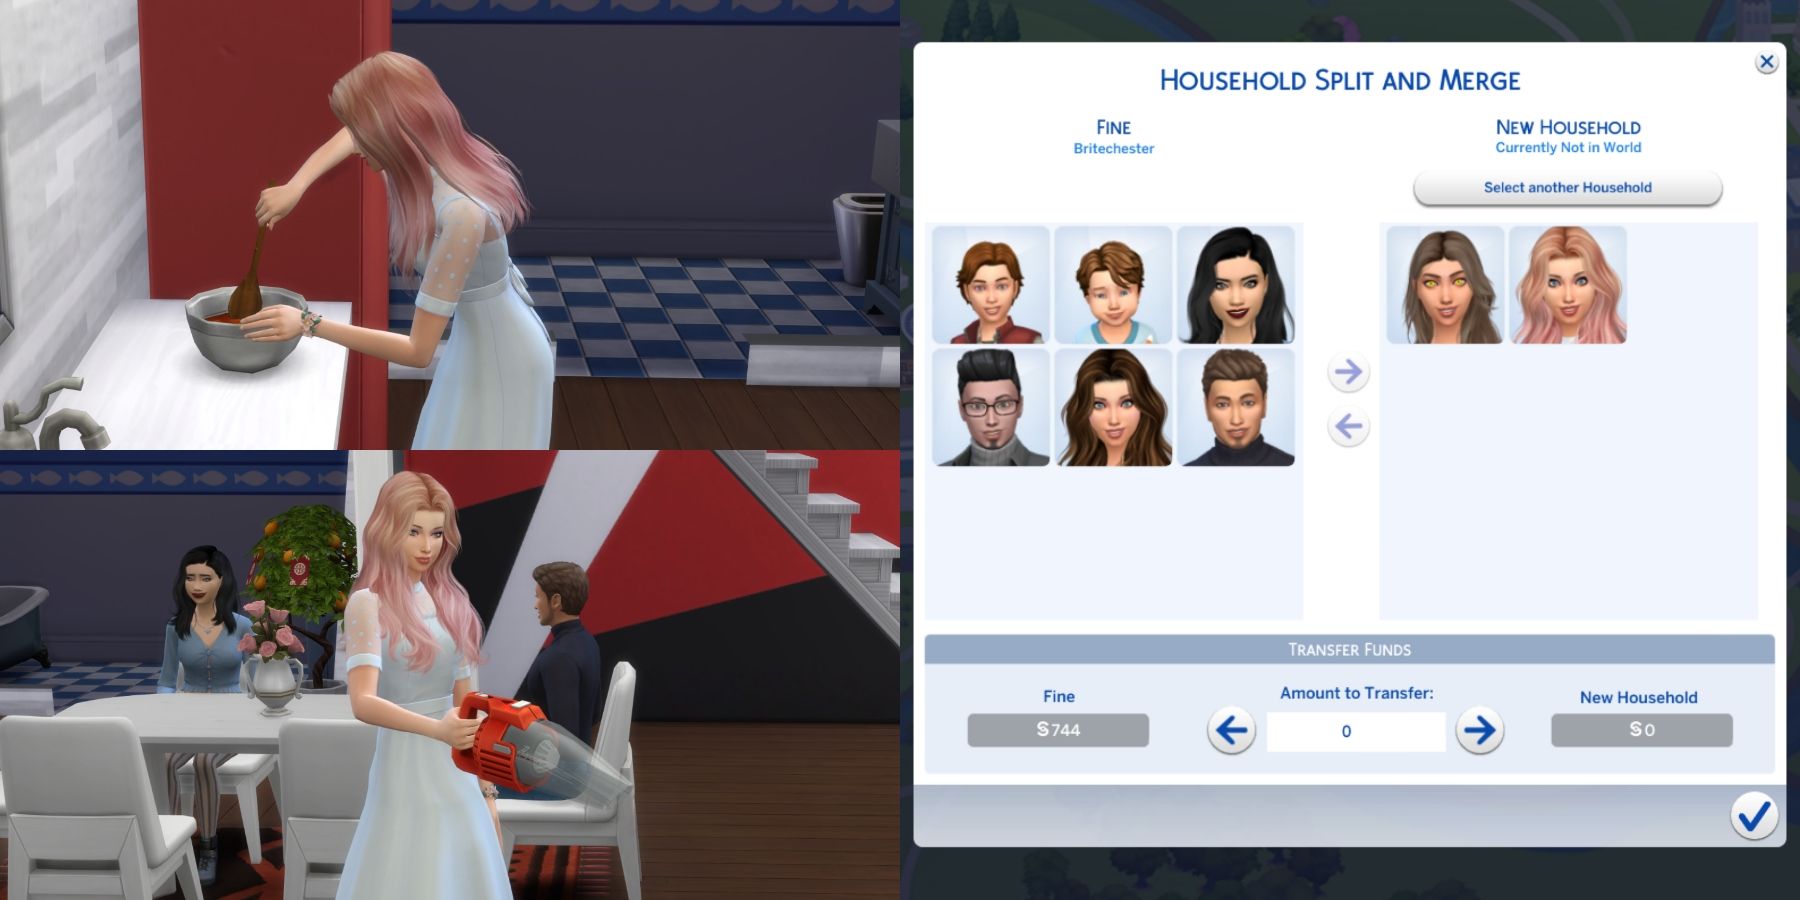 splitting or merging options in the sims 4